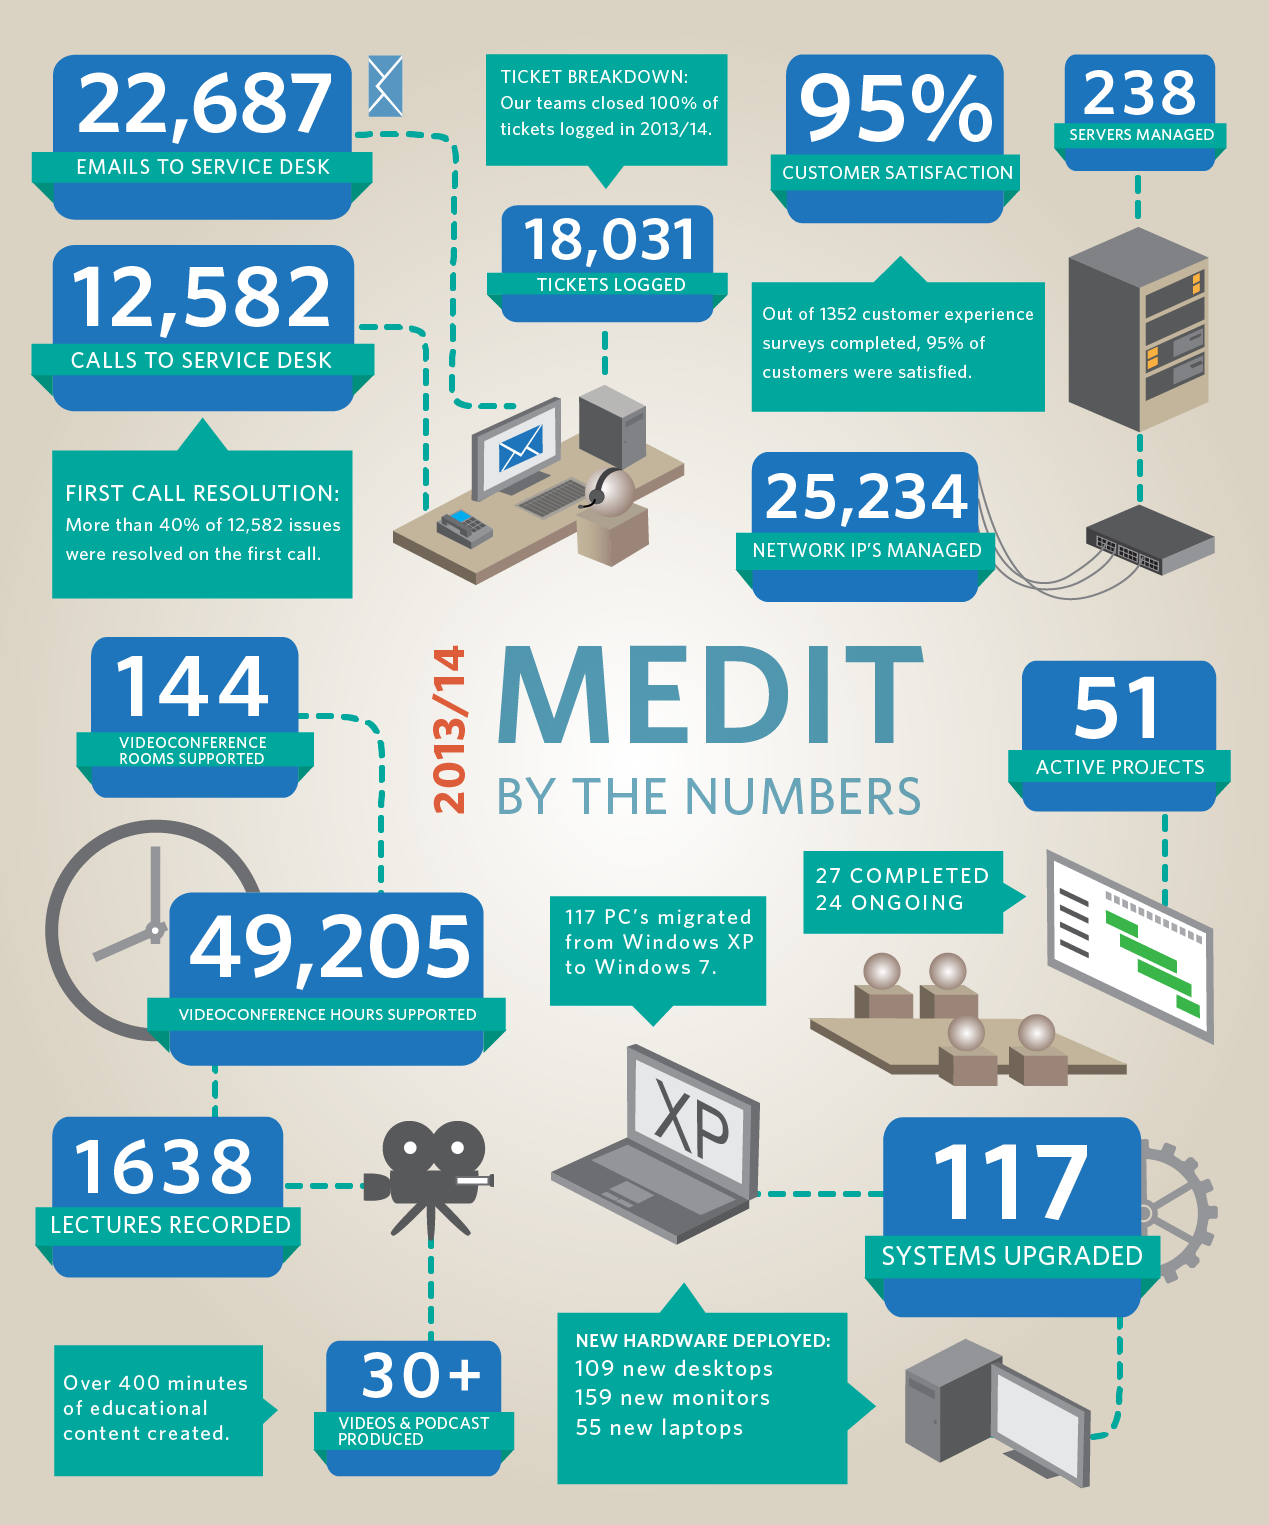 MedIT by the Numbers